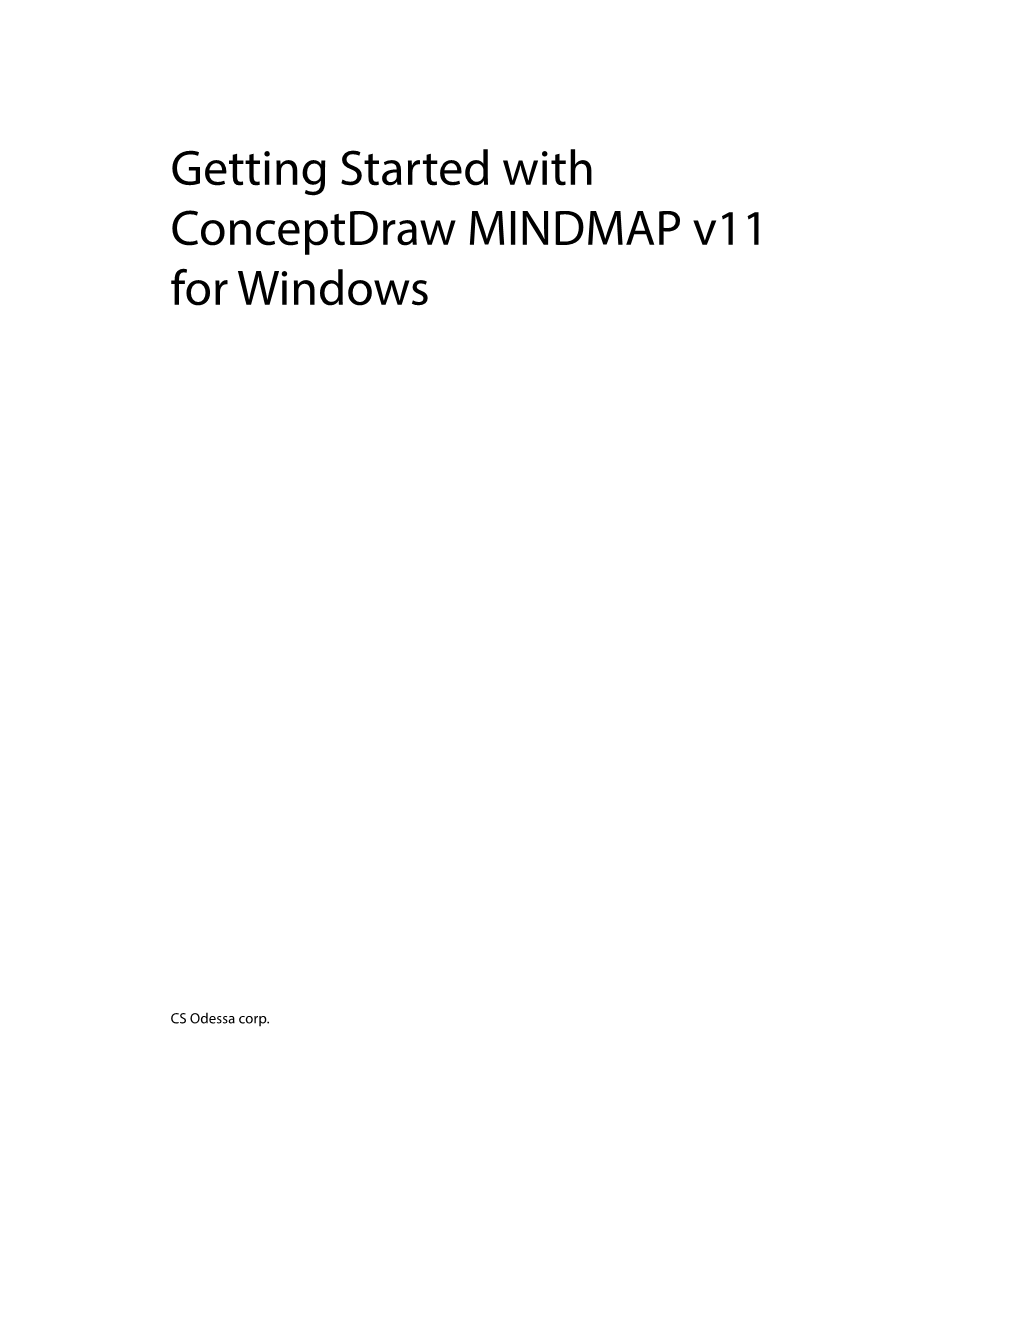 Conceptdraw MINDMAP for Windows Getting Started Guide